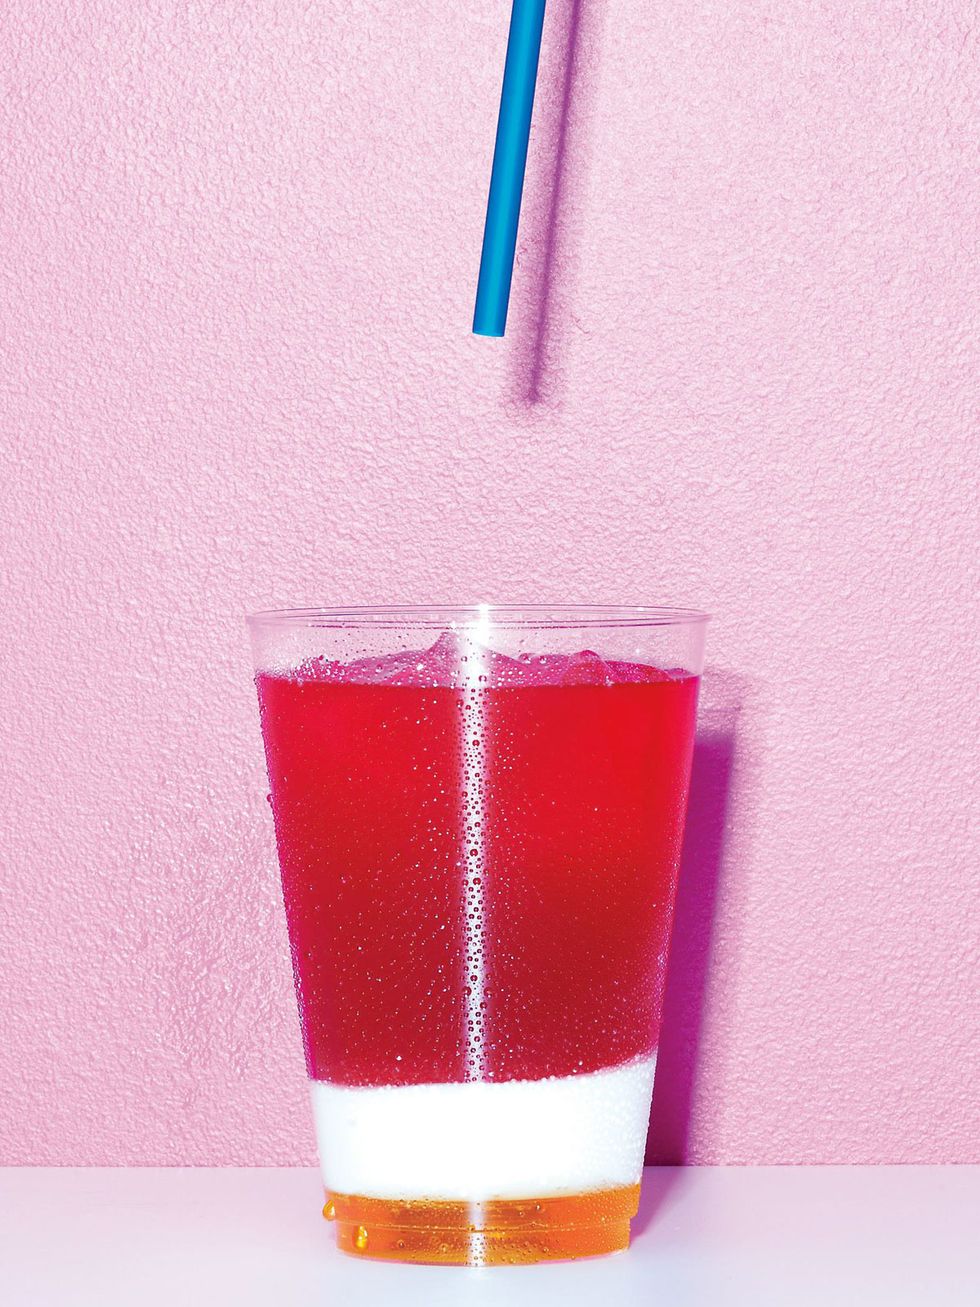 Liquid, Drink, Alcoholic beverage, Red, Fluid, Colorfulness, Ingredient, Tableware, Apéritif, Cocktail, 